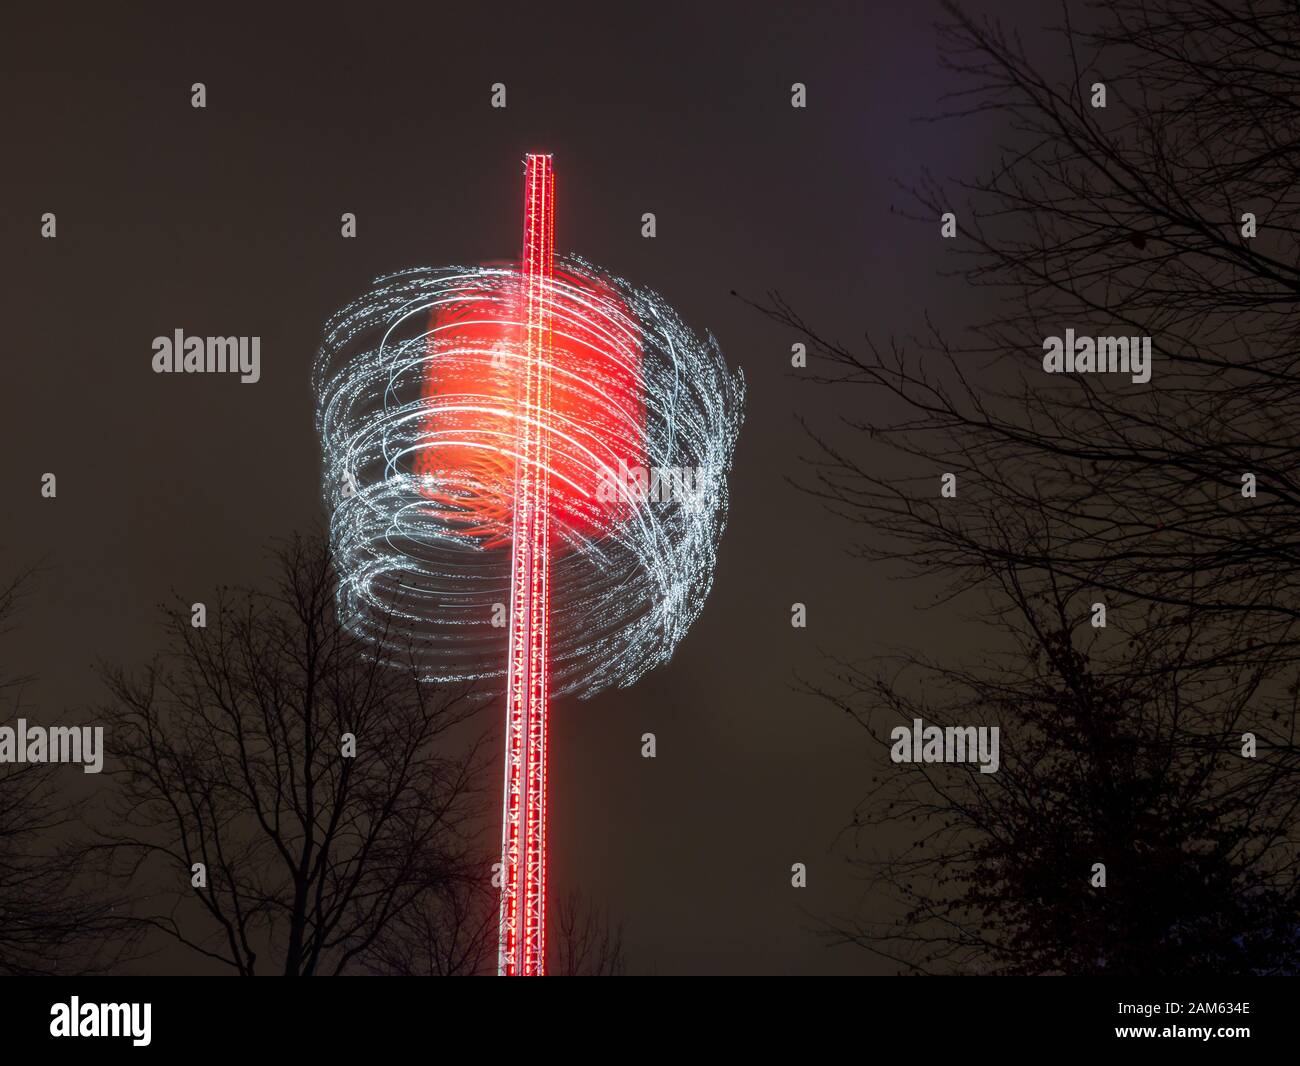 Moving round wheel at night generating abstract lights around the shaft in winter wonderland outdoors, in holiday time, London Stock Photo